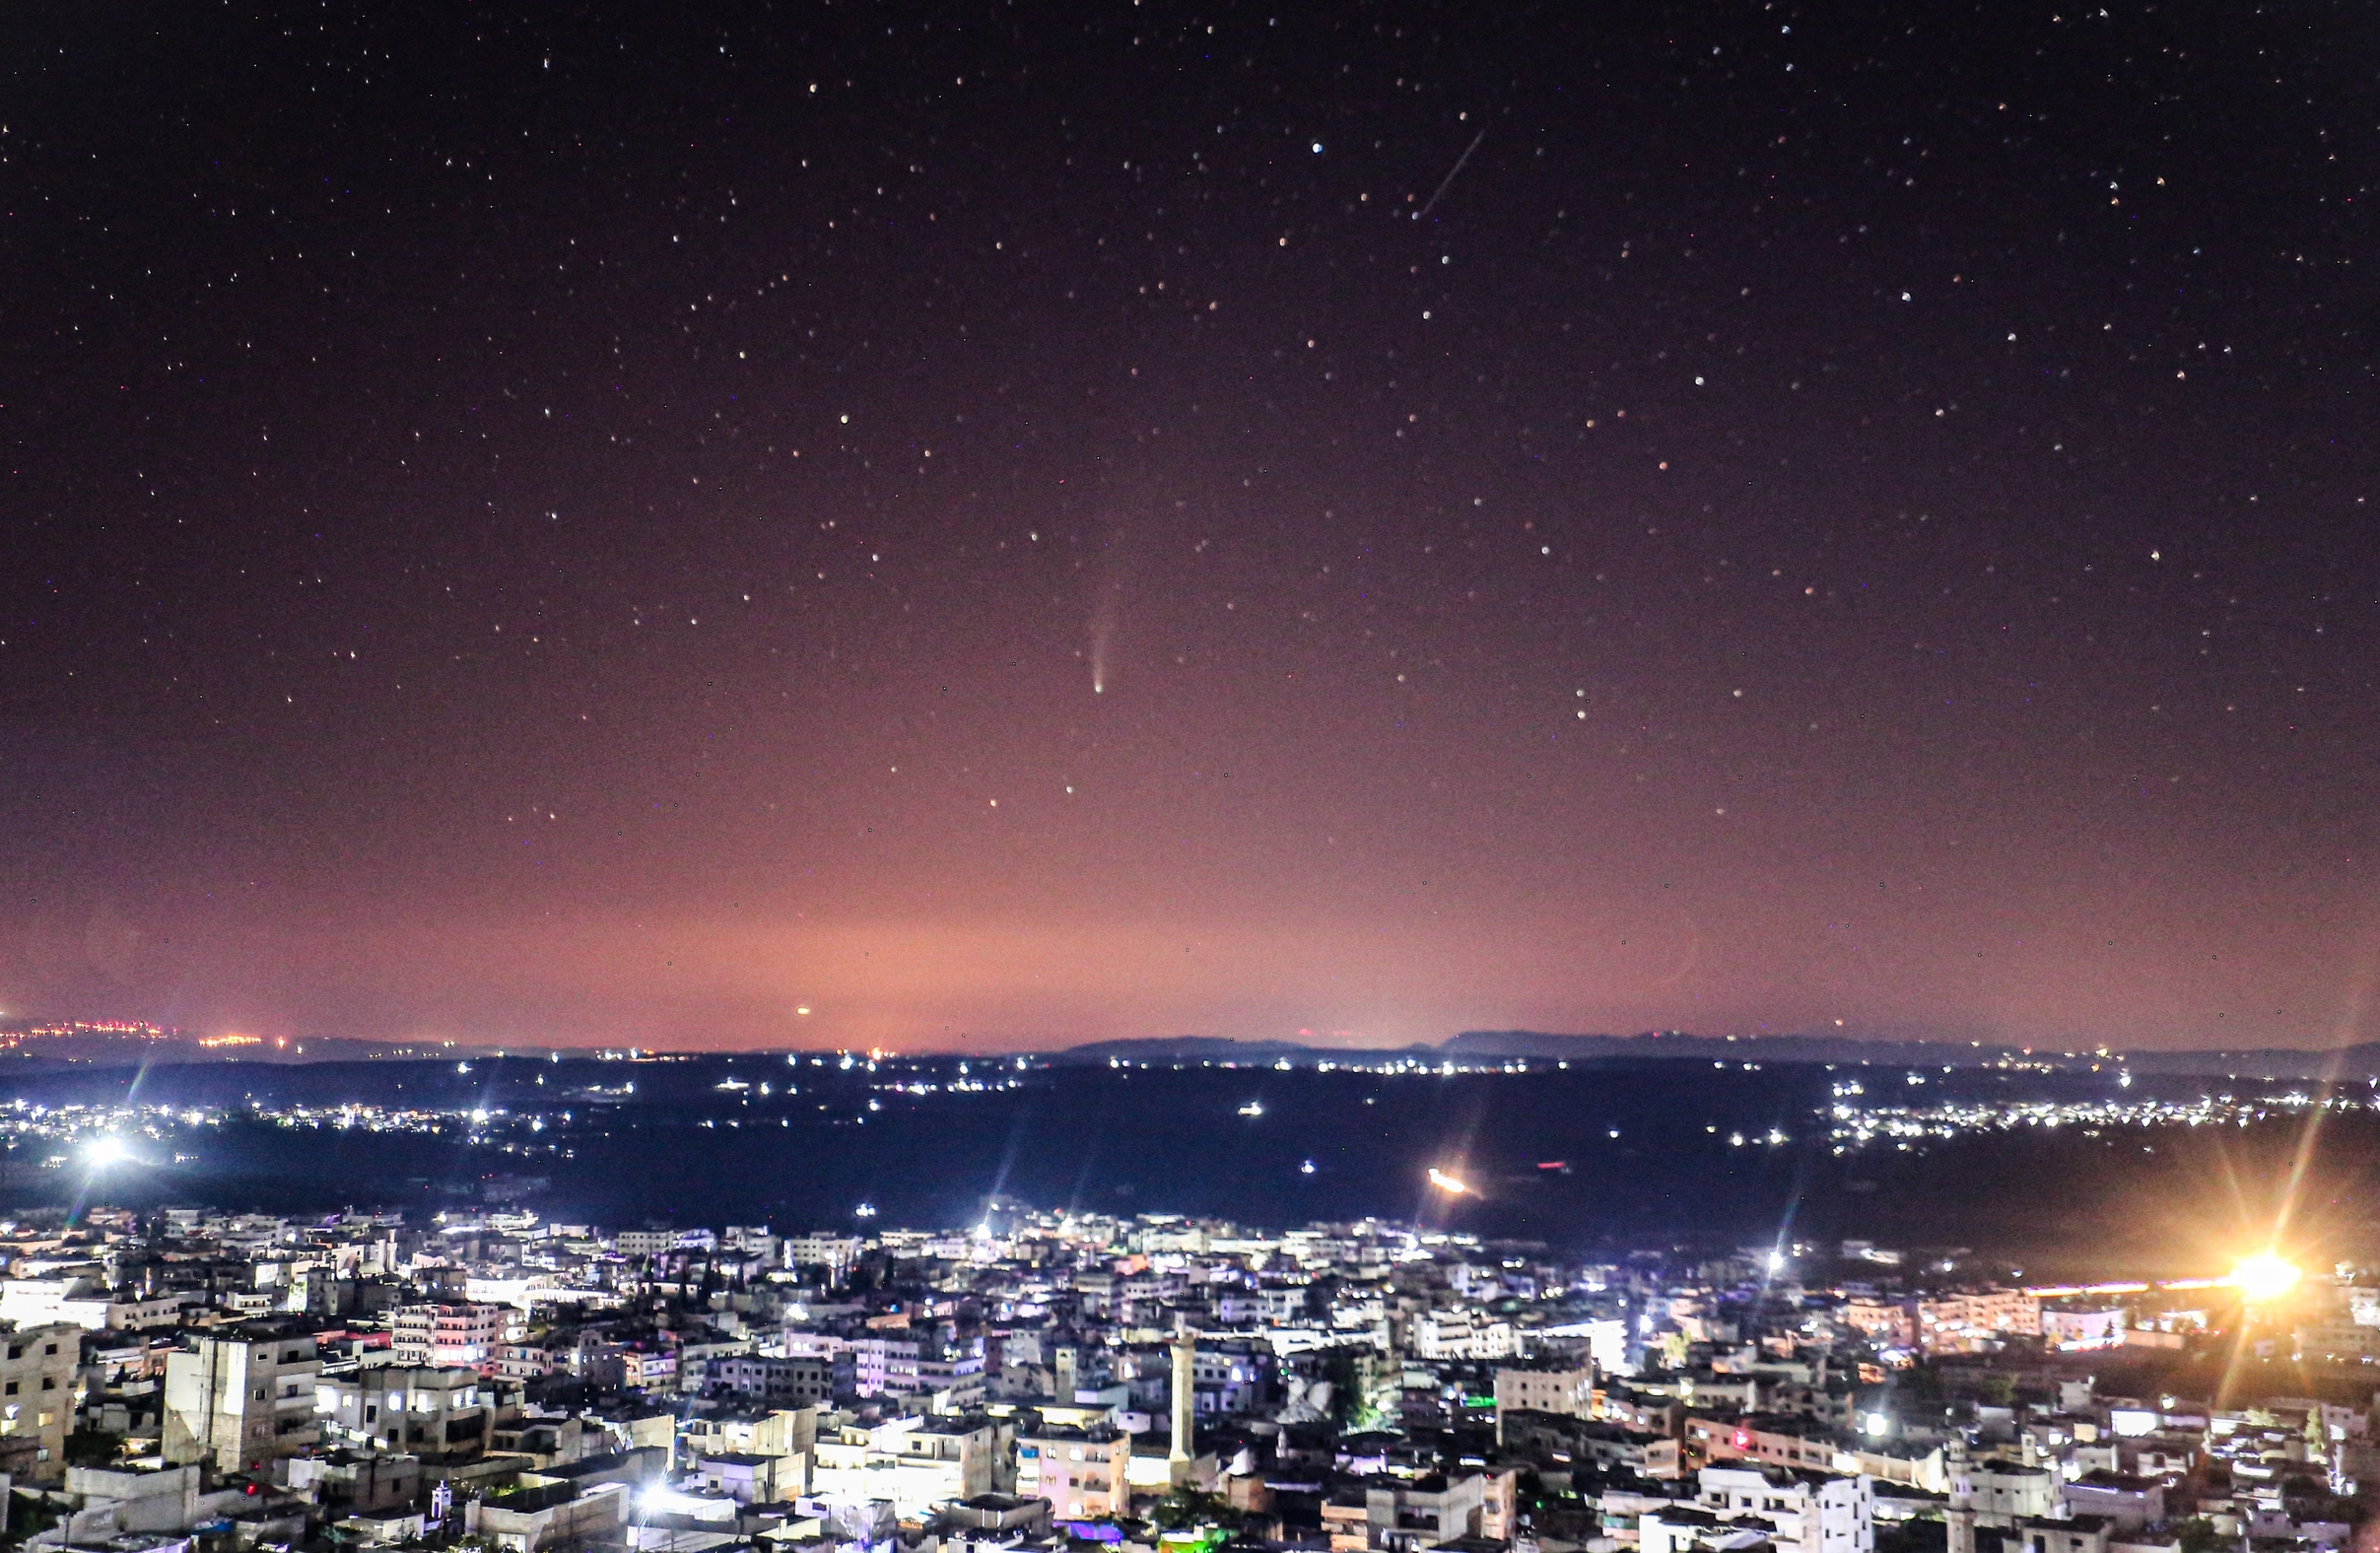 View of Comet Neowise from Syria's Idlib